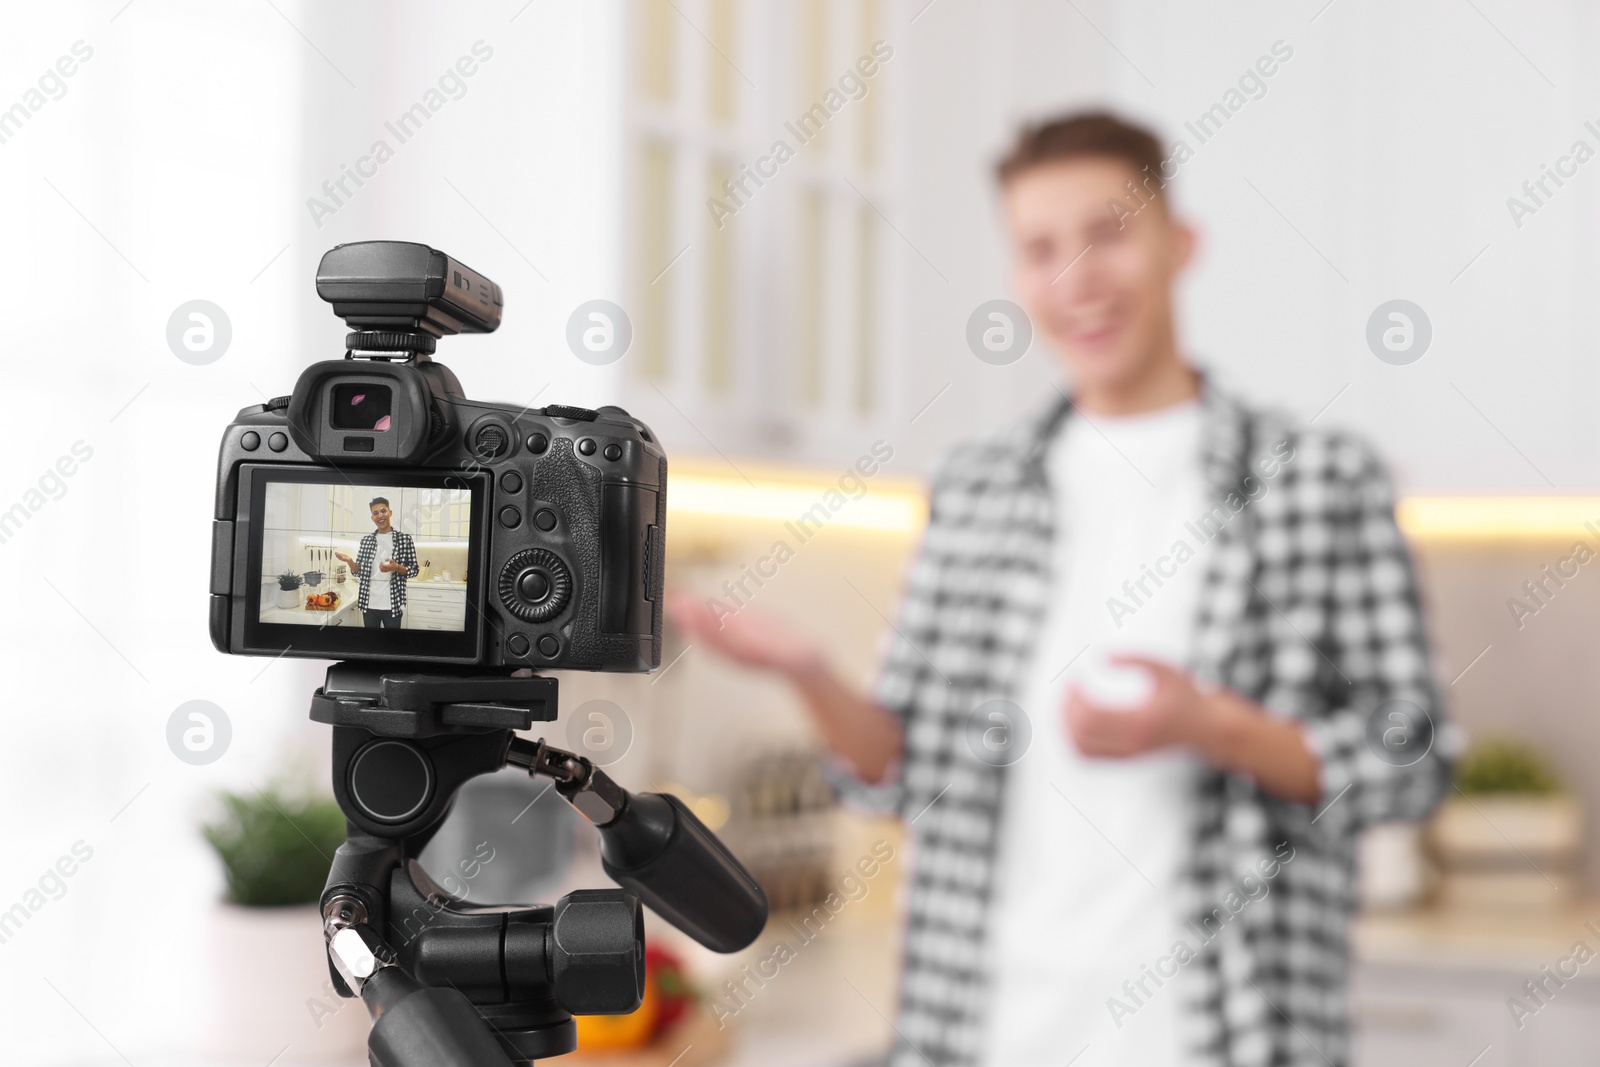 Photo of Food blogger recording video in kitchen, focus on camera